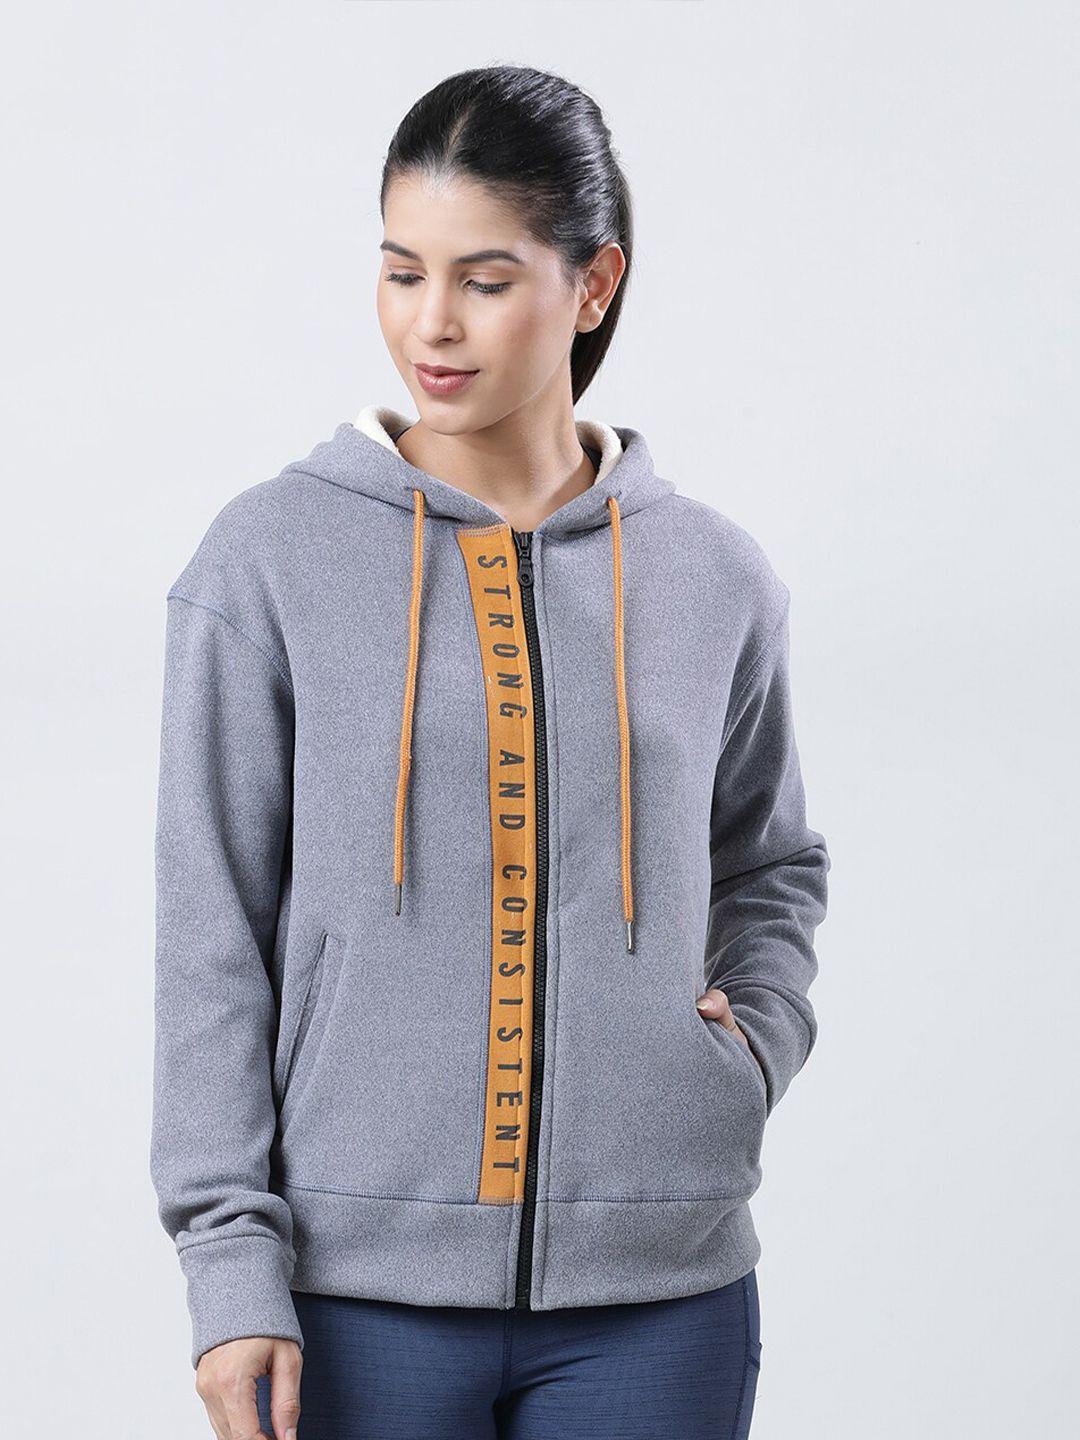 lovable sport typography printed hooded sporty jacket